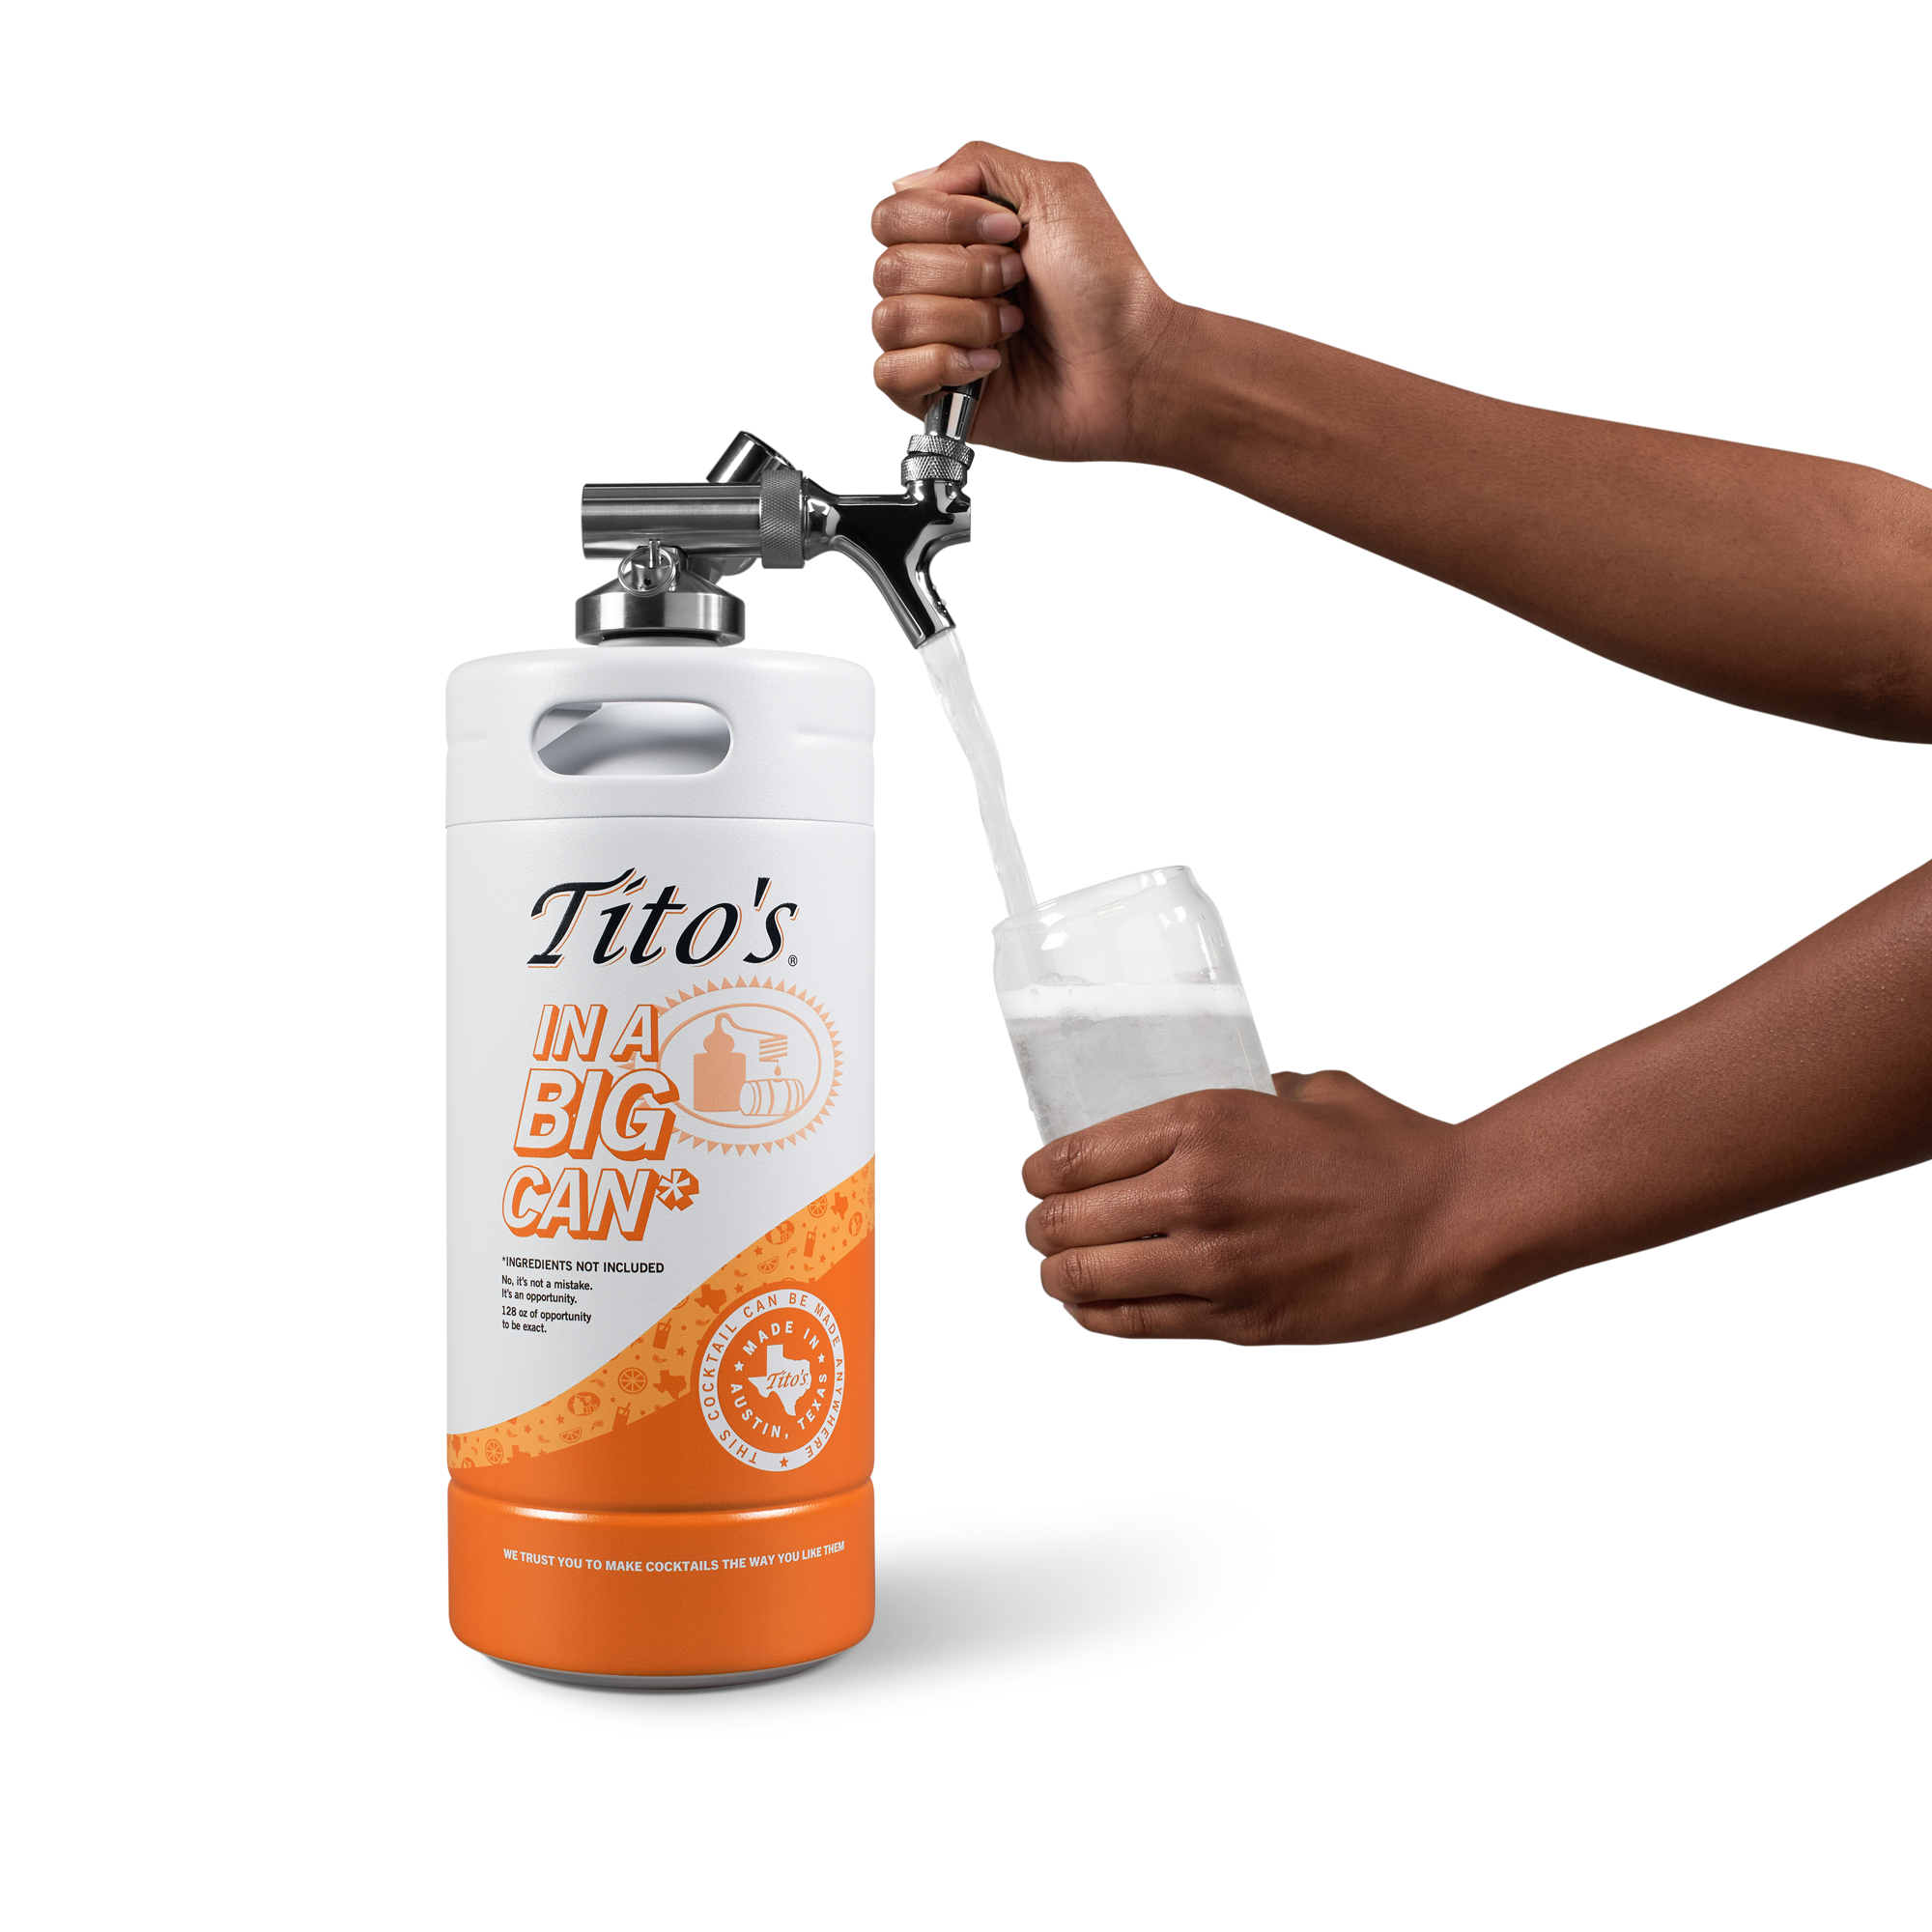 Tito's in a Big Can* pouring into a glass